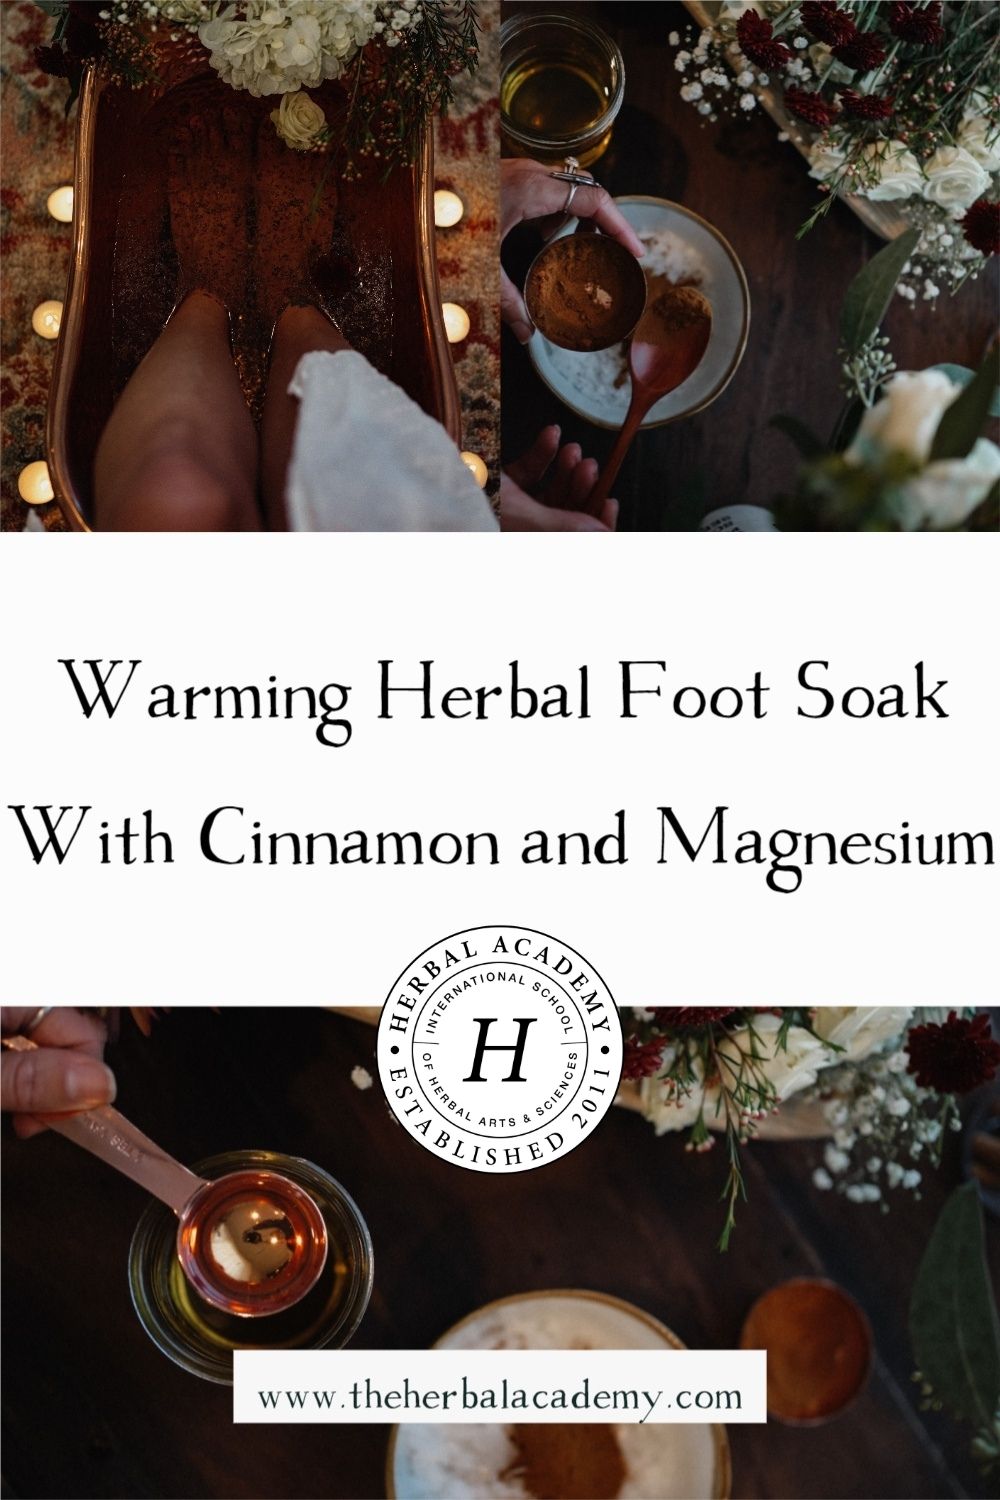 Warming Herbal Foot Soak With Cinnamon and Magnesium | Herbal Academy | A simple herbal foot soak is a great way to introduce the benefits of a warm, grounding soak with cinnamon and magnesium this winter!